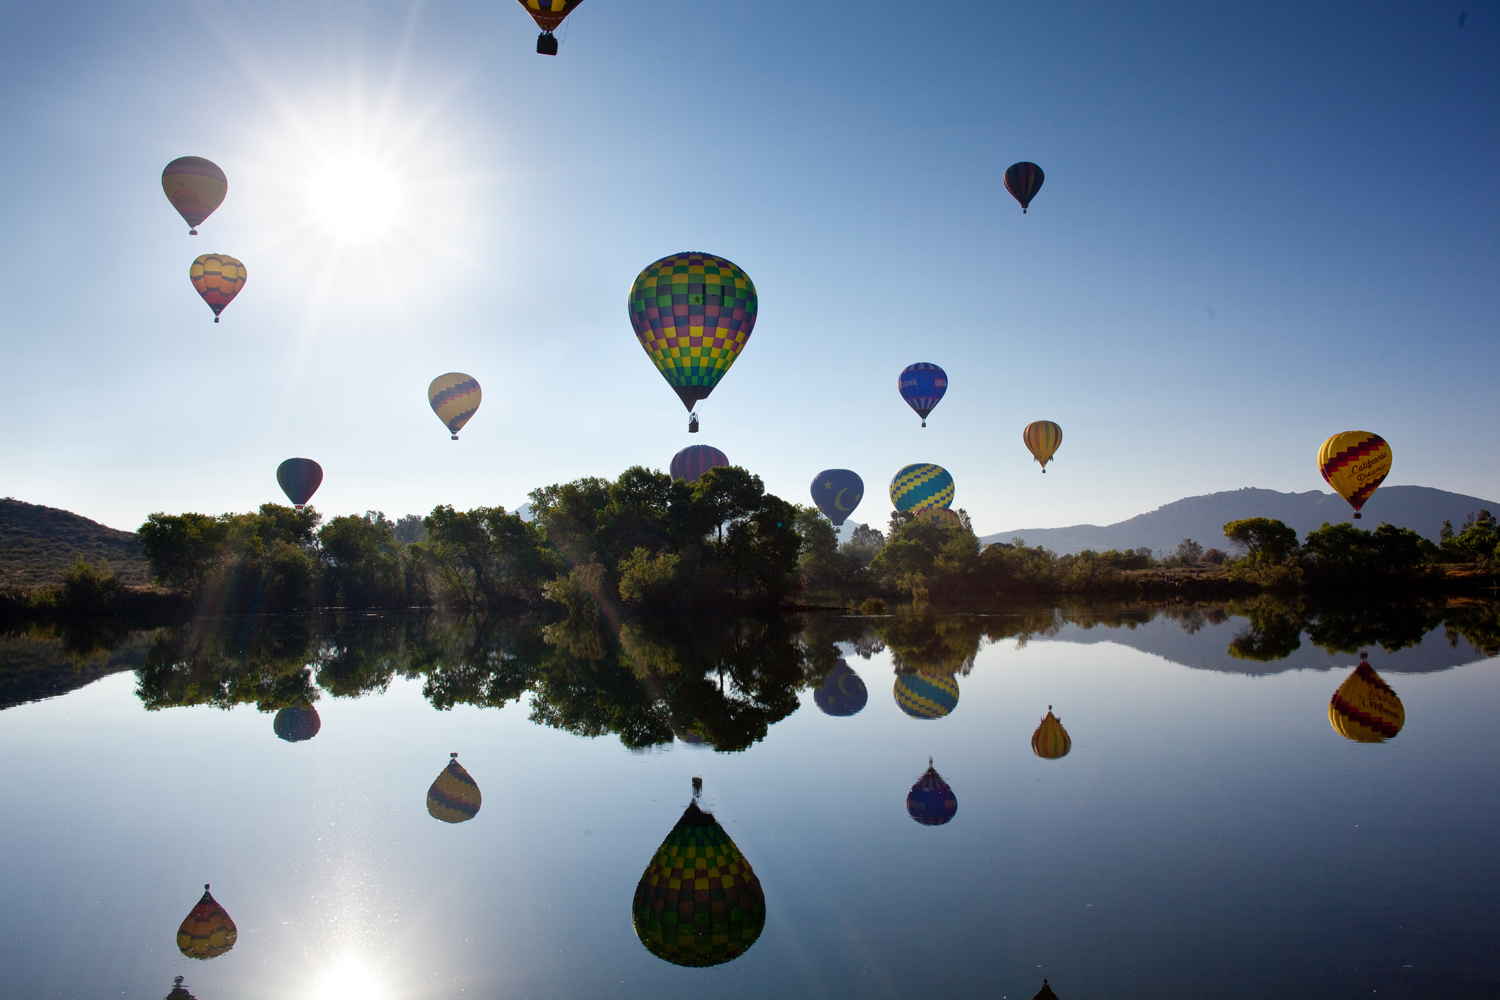 Sunrise over Lake Skinner during the Temecula Valley Balloon & Wine Festival hot air balloon launch